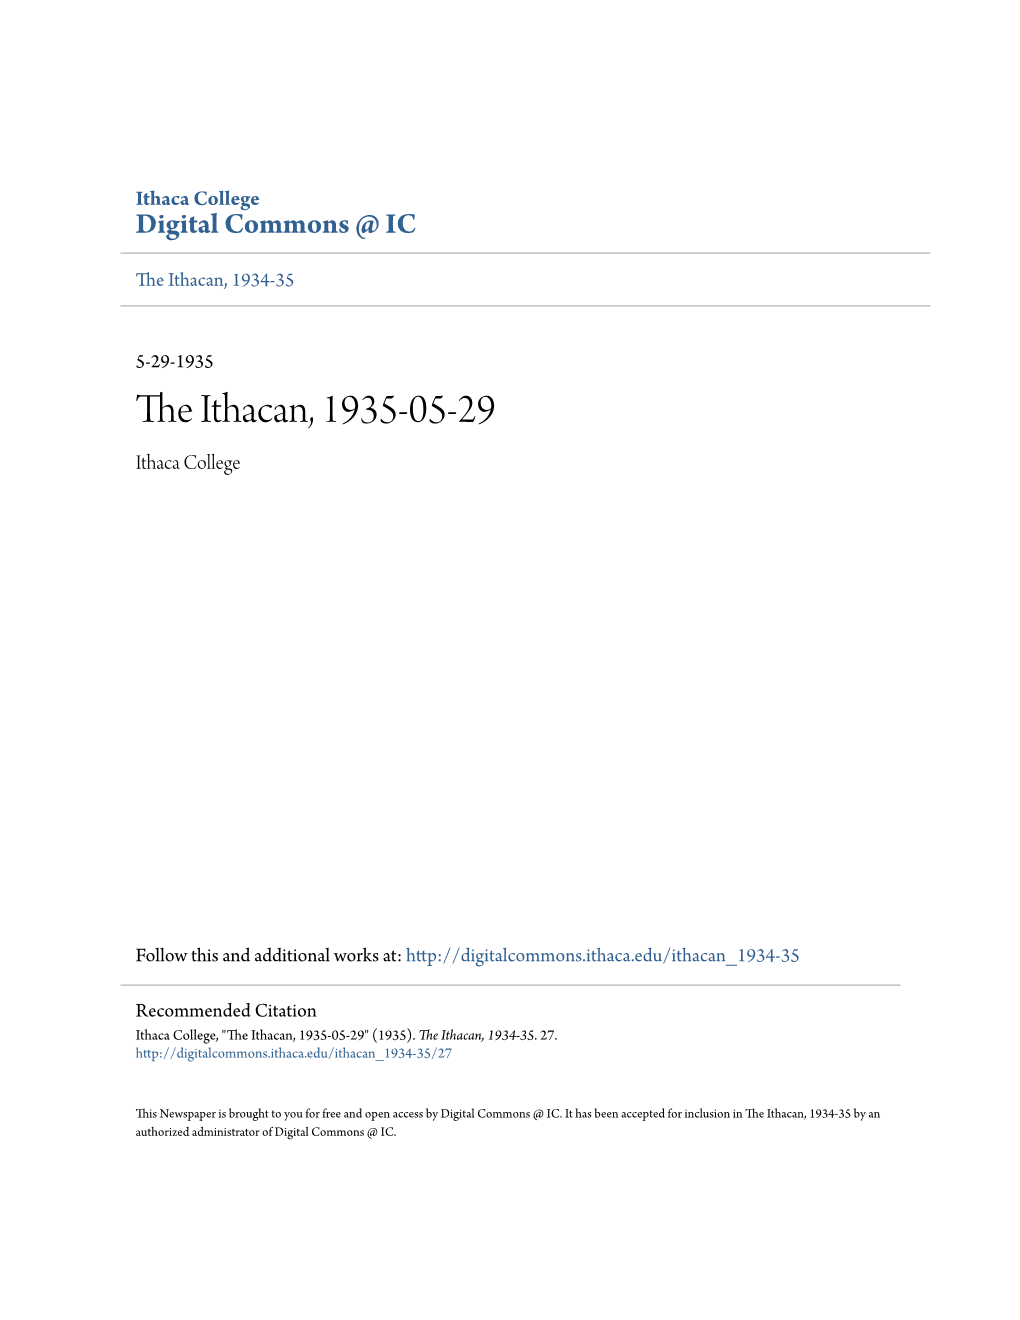 The Ithacan, 1935-05-29